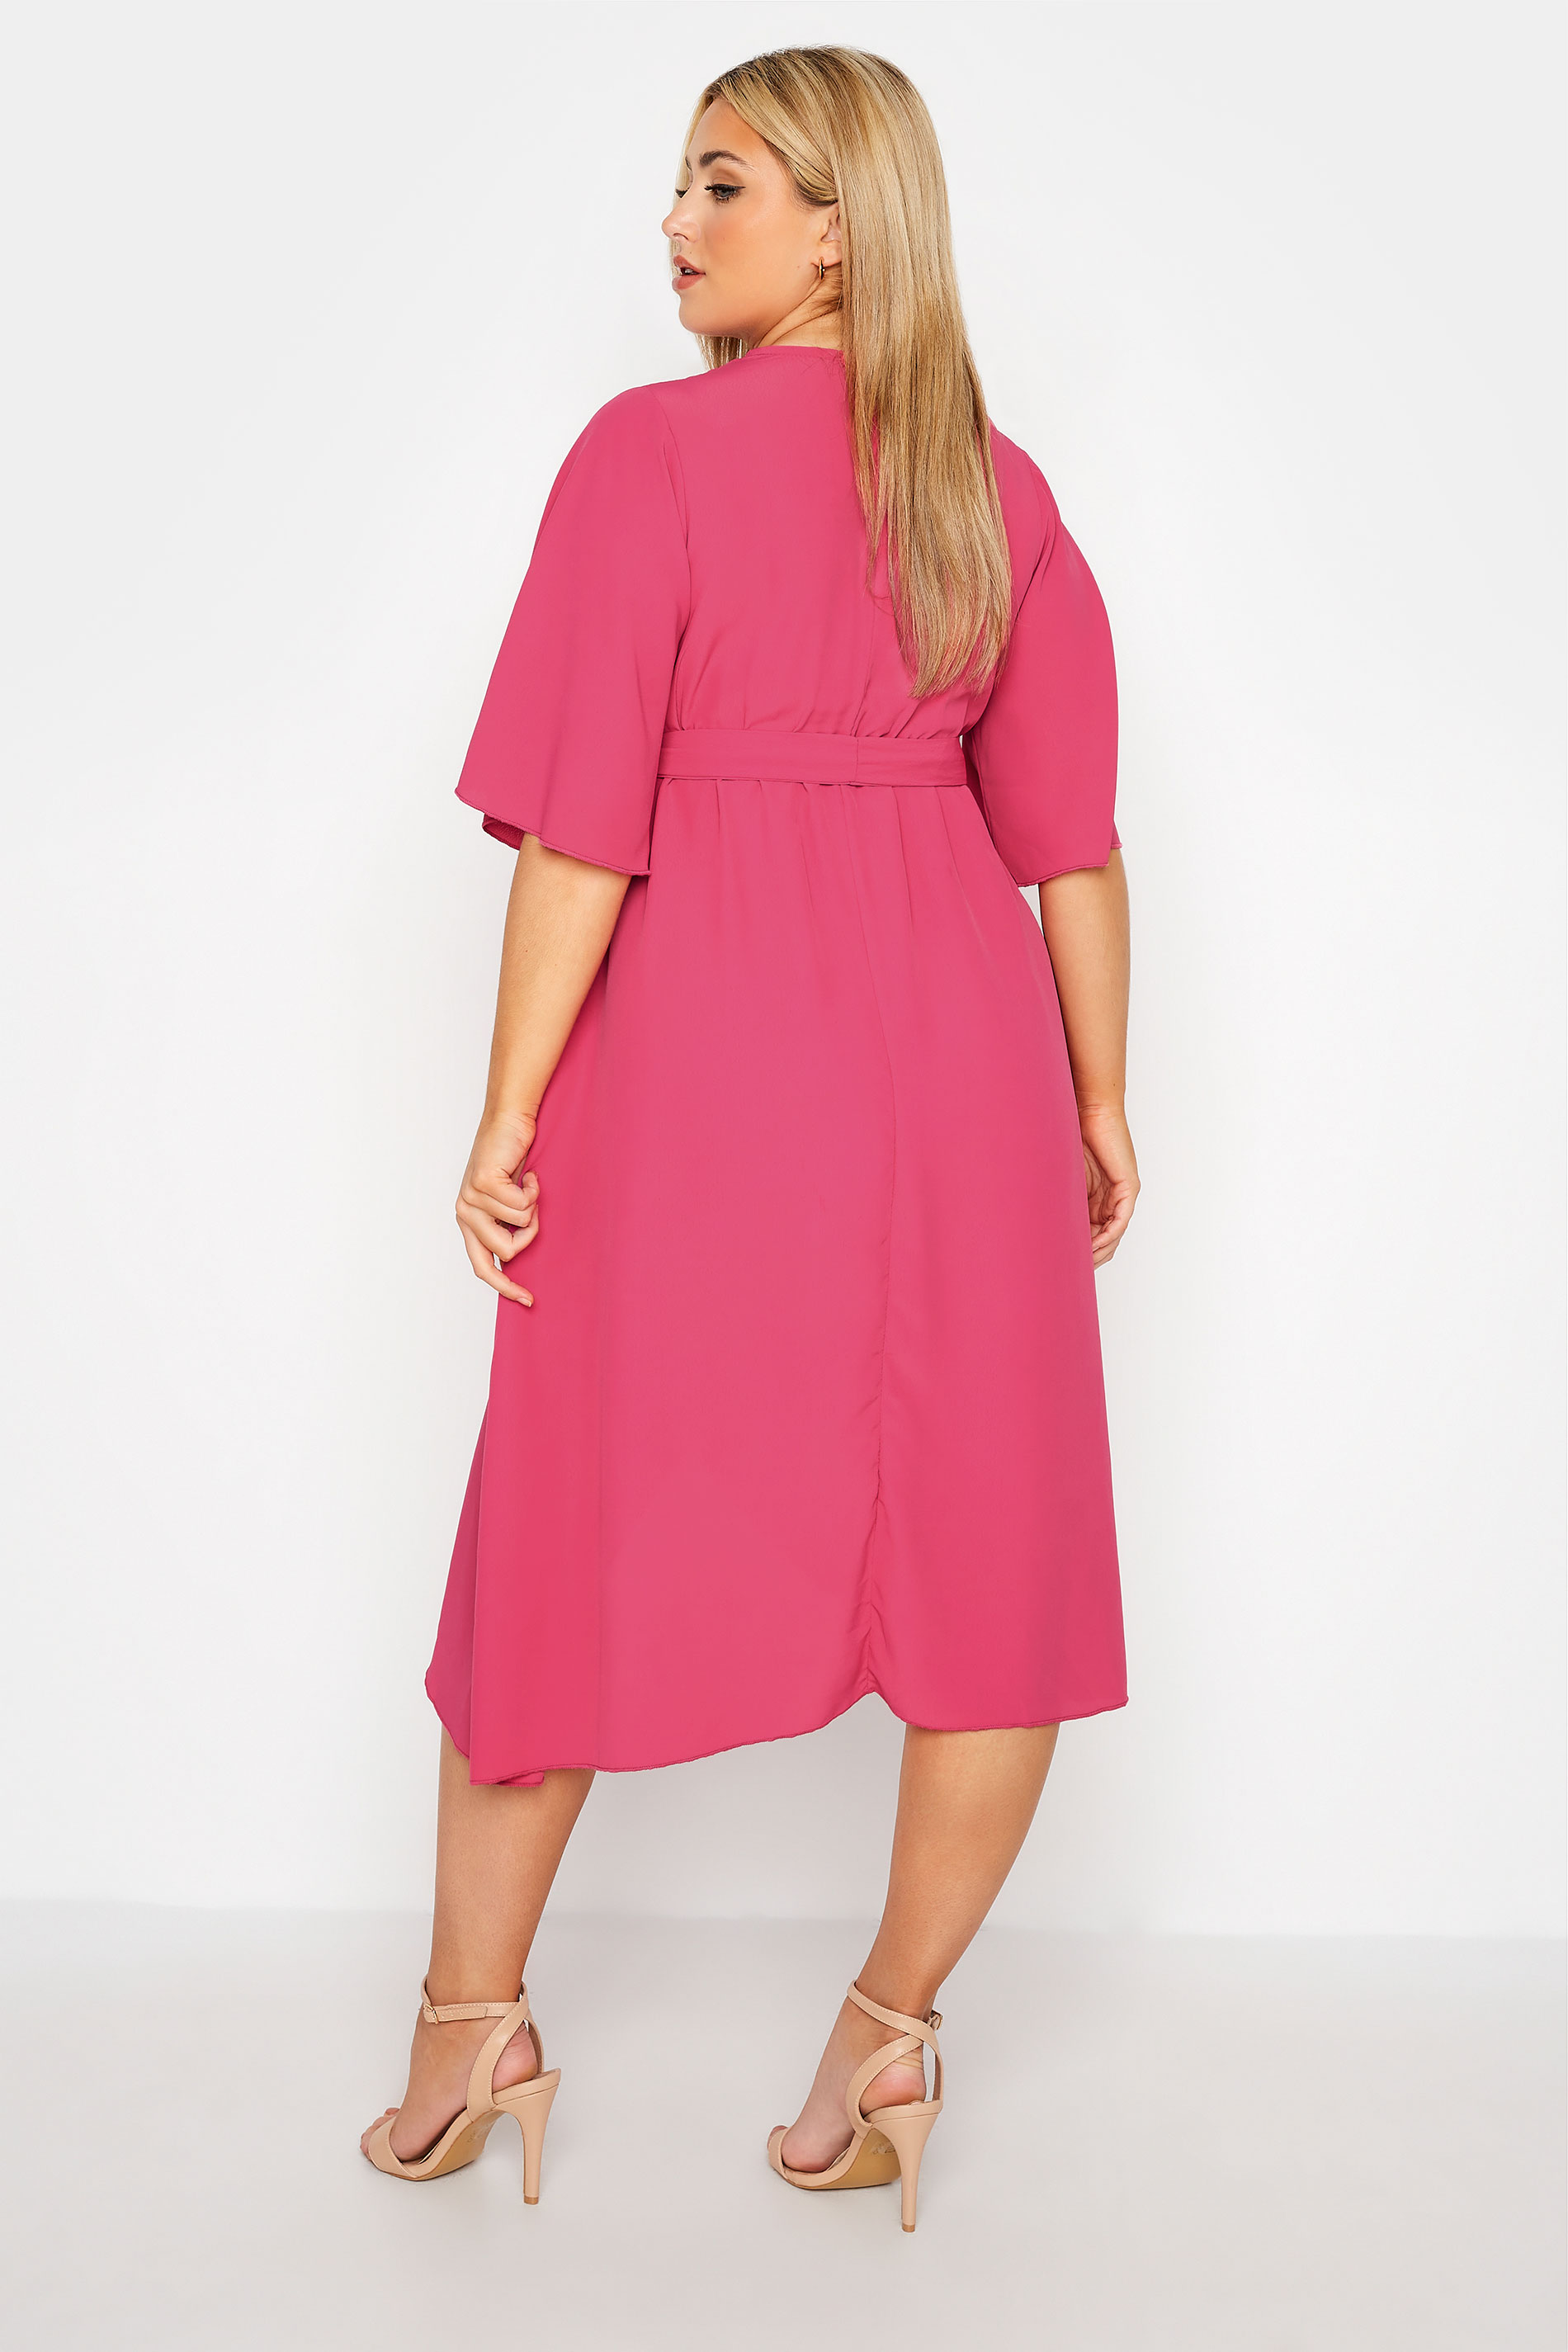 Robes Grande Taille Grande taille  Robes Portefeuilles | YOURS LONDON - Robe Rose Style Portefeuille - HD02896